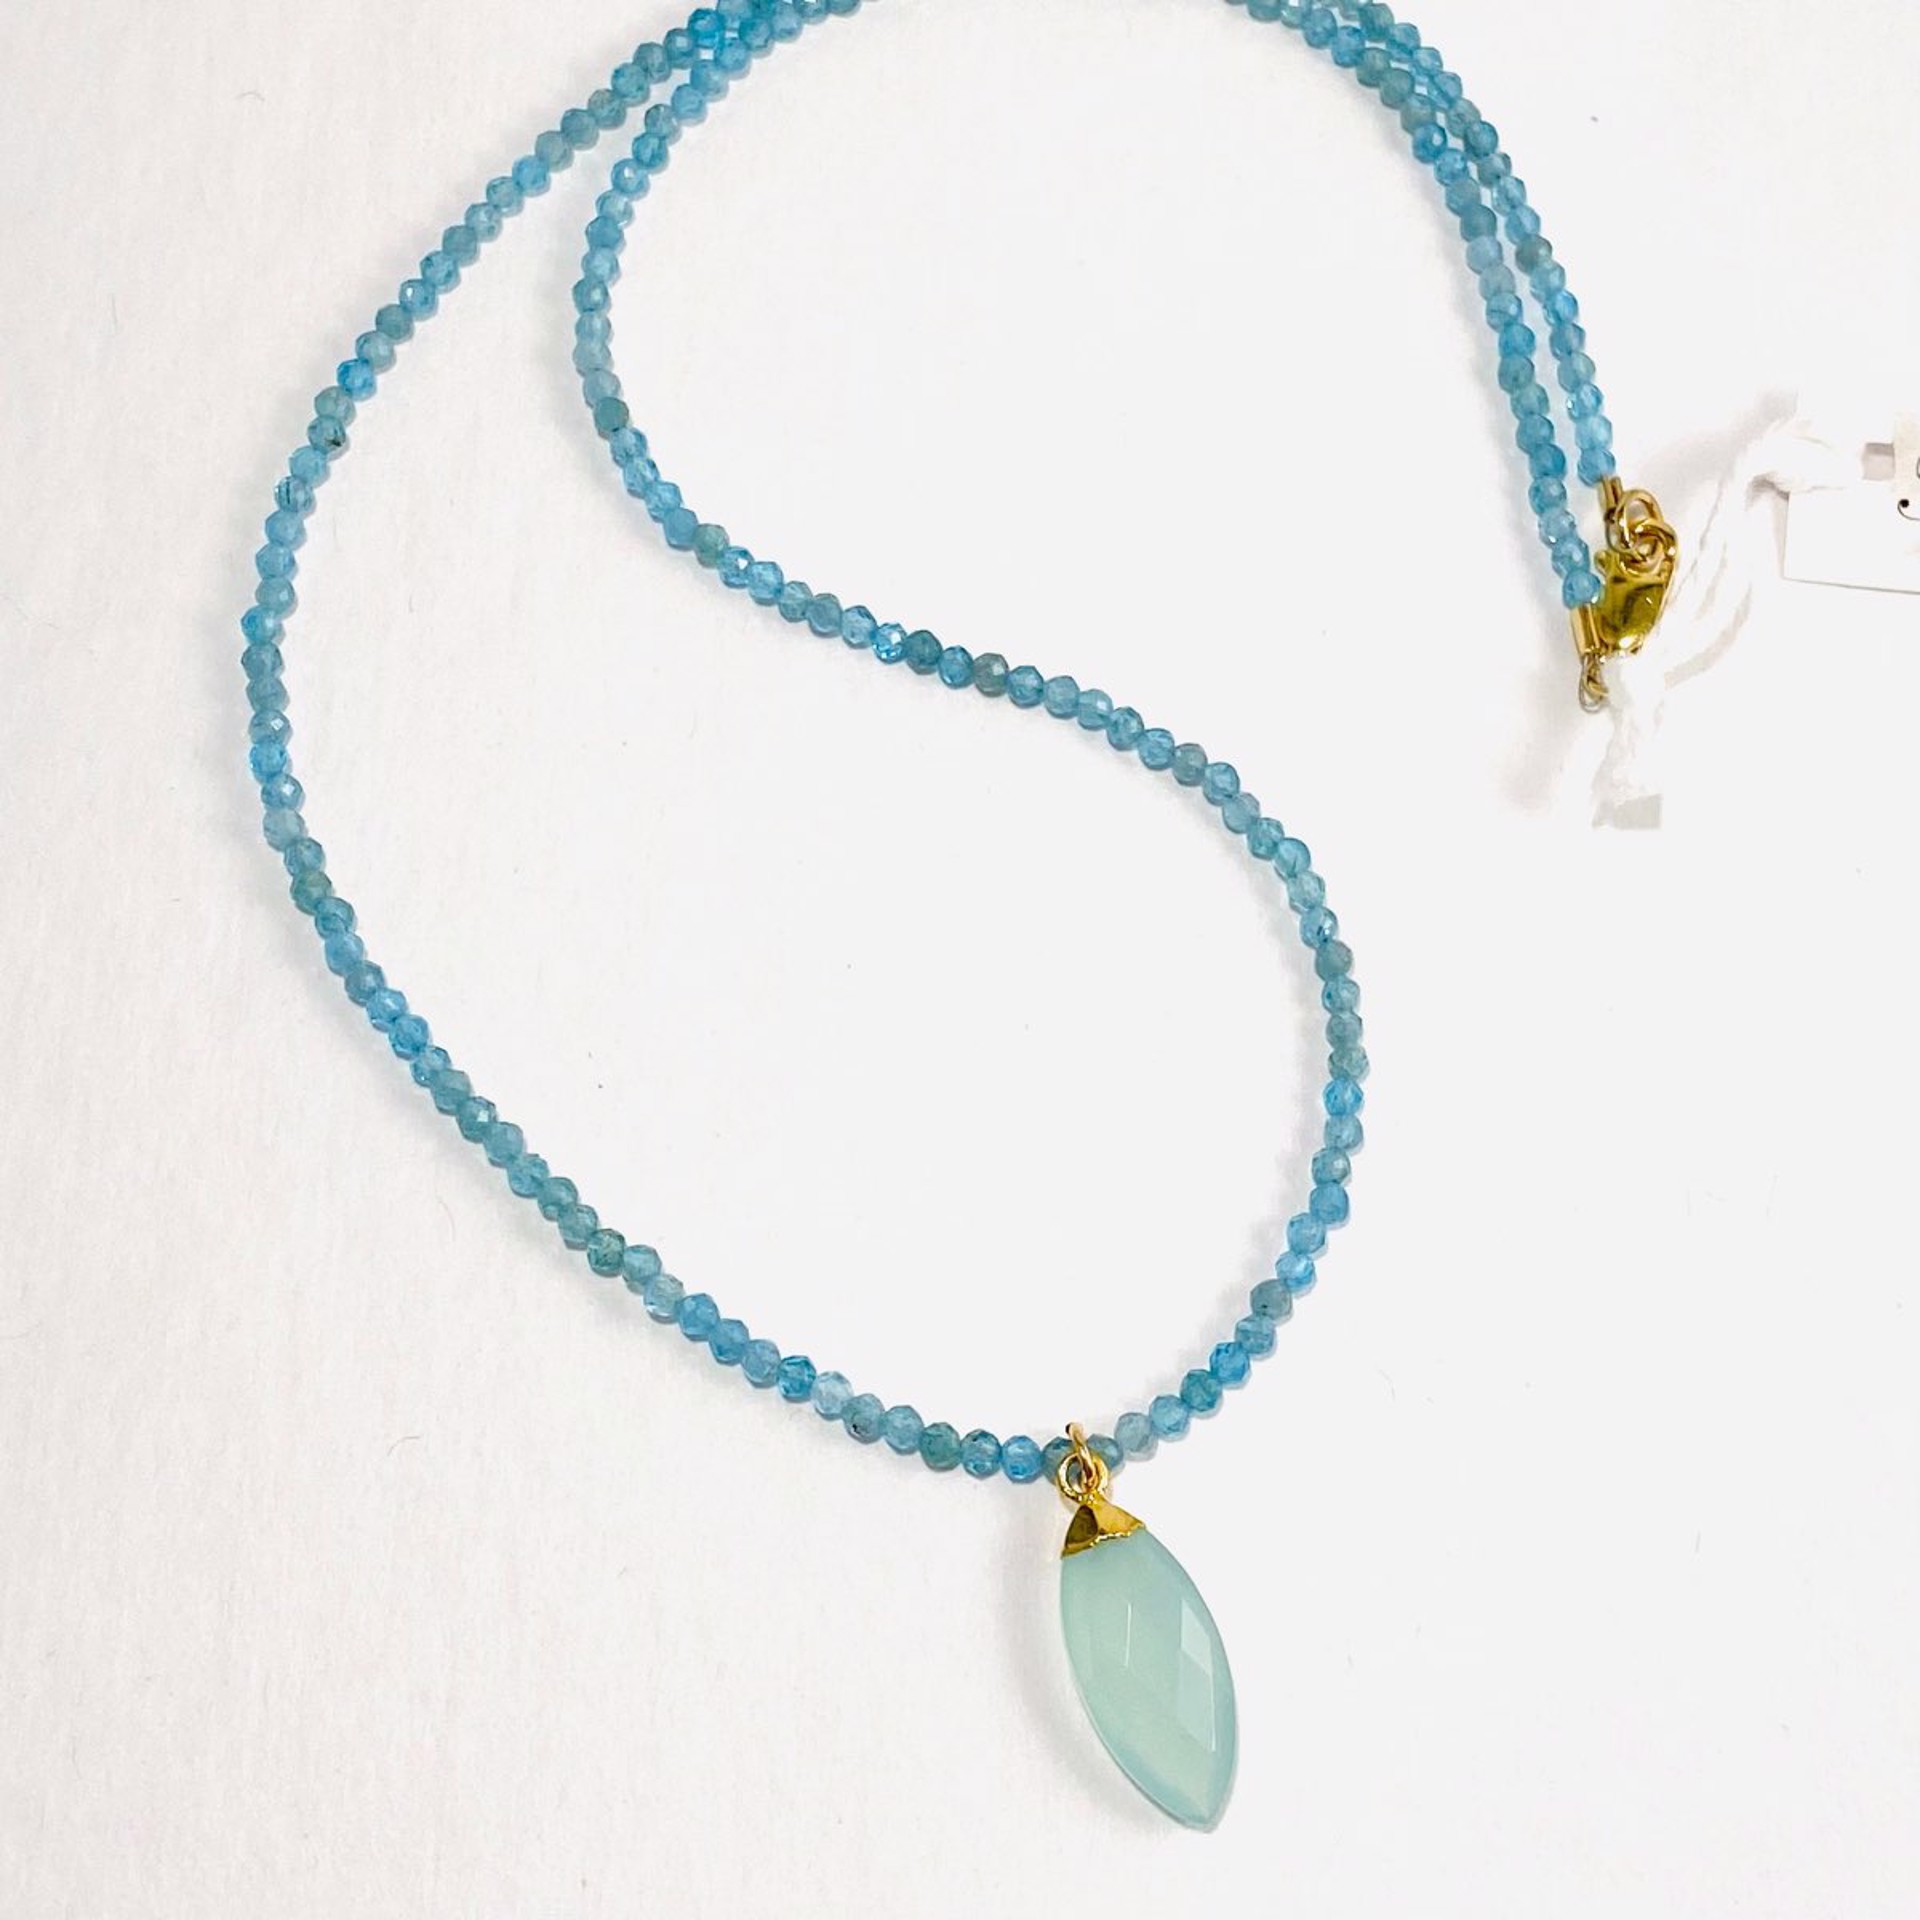 NT22-227  Tiny Faceted Apatite Marquis Aqua Chalcedony Pendant Necklace by Nance Trueworthy